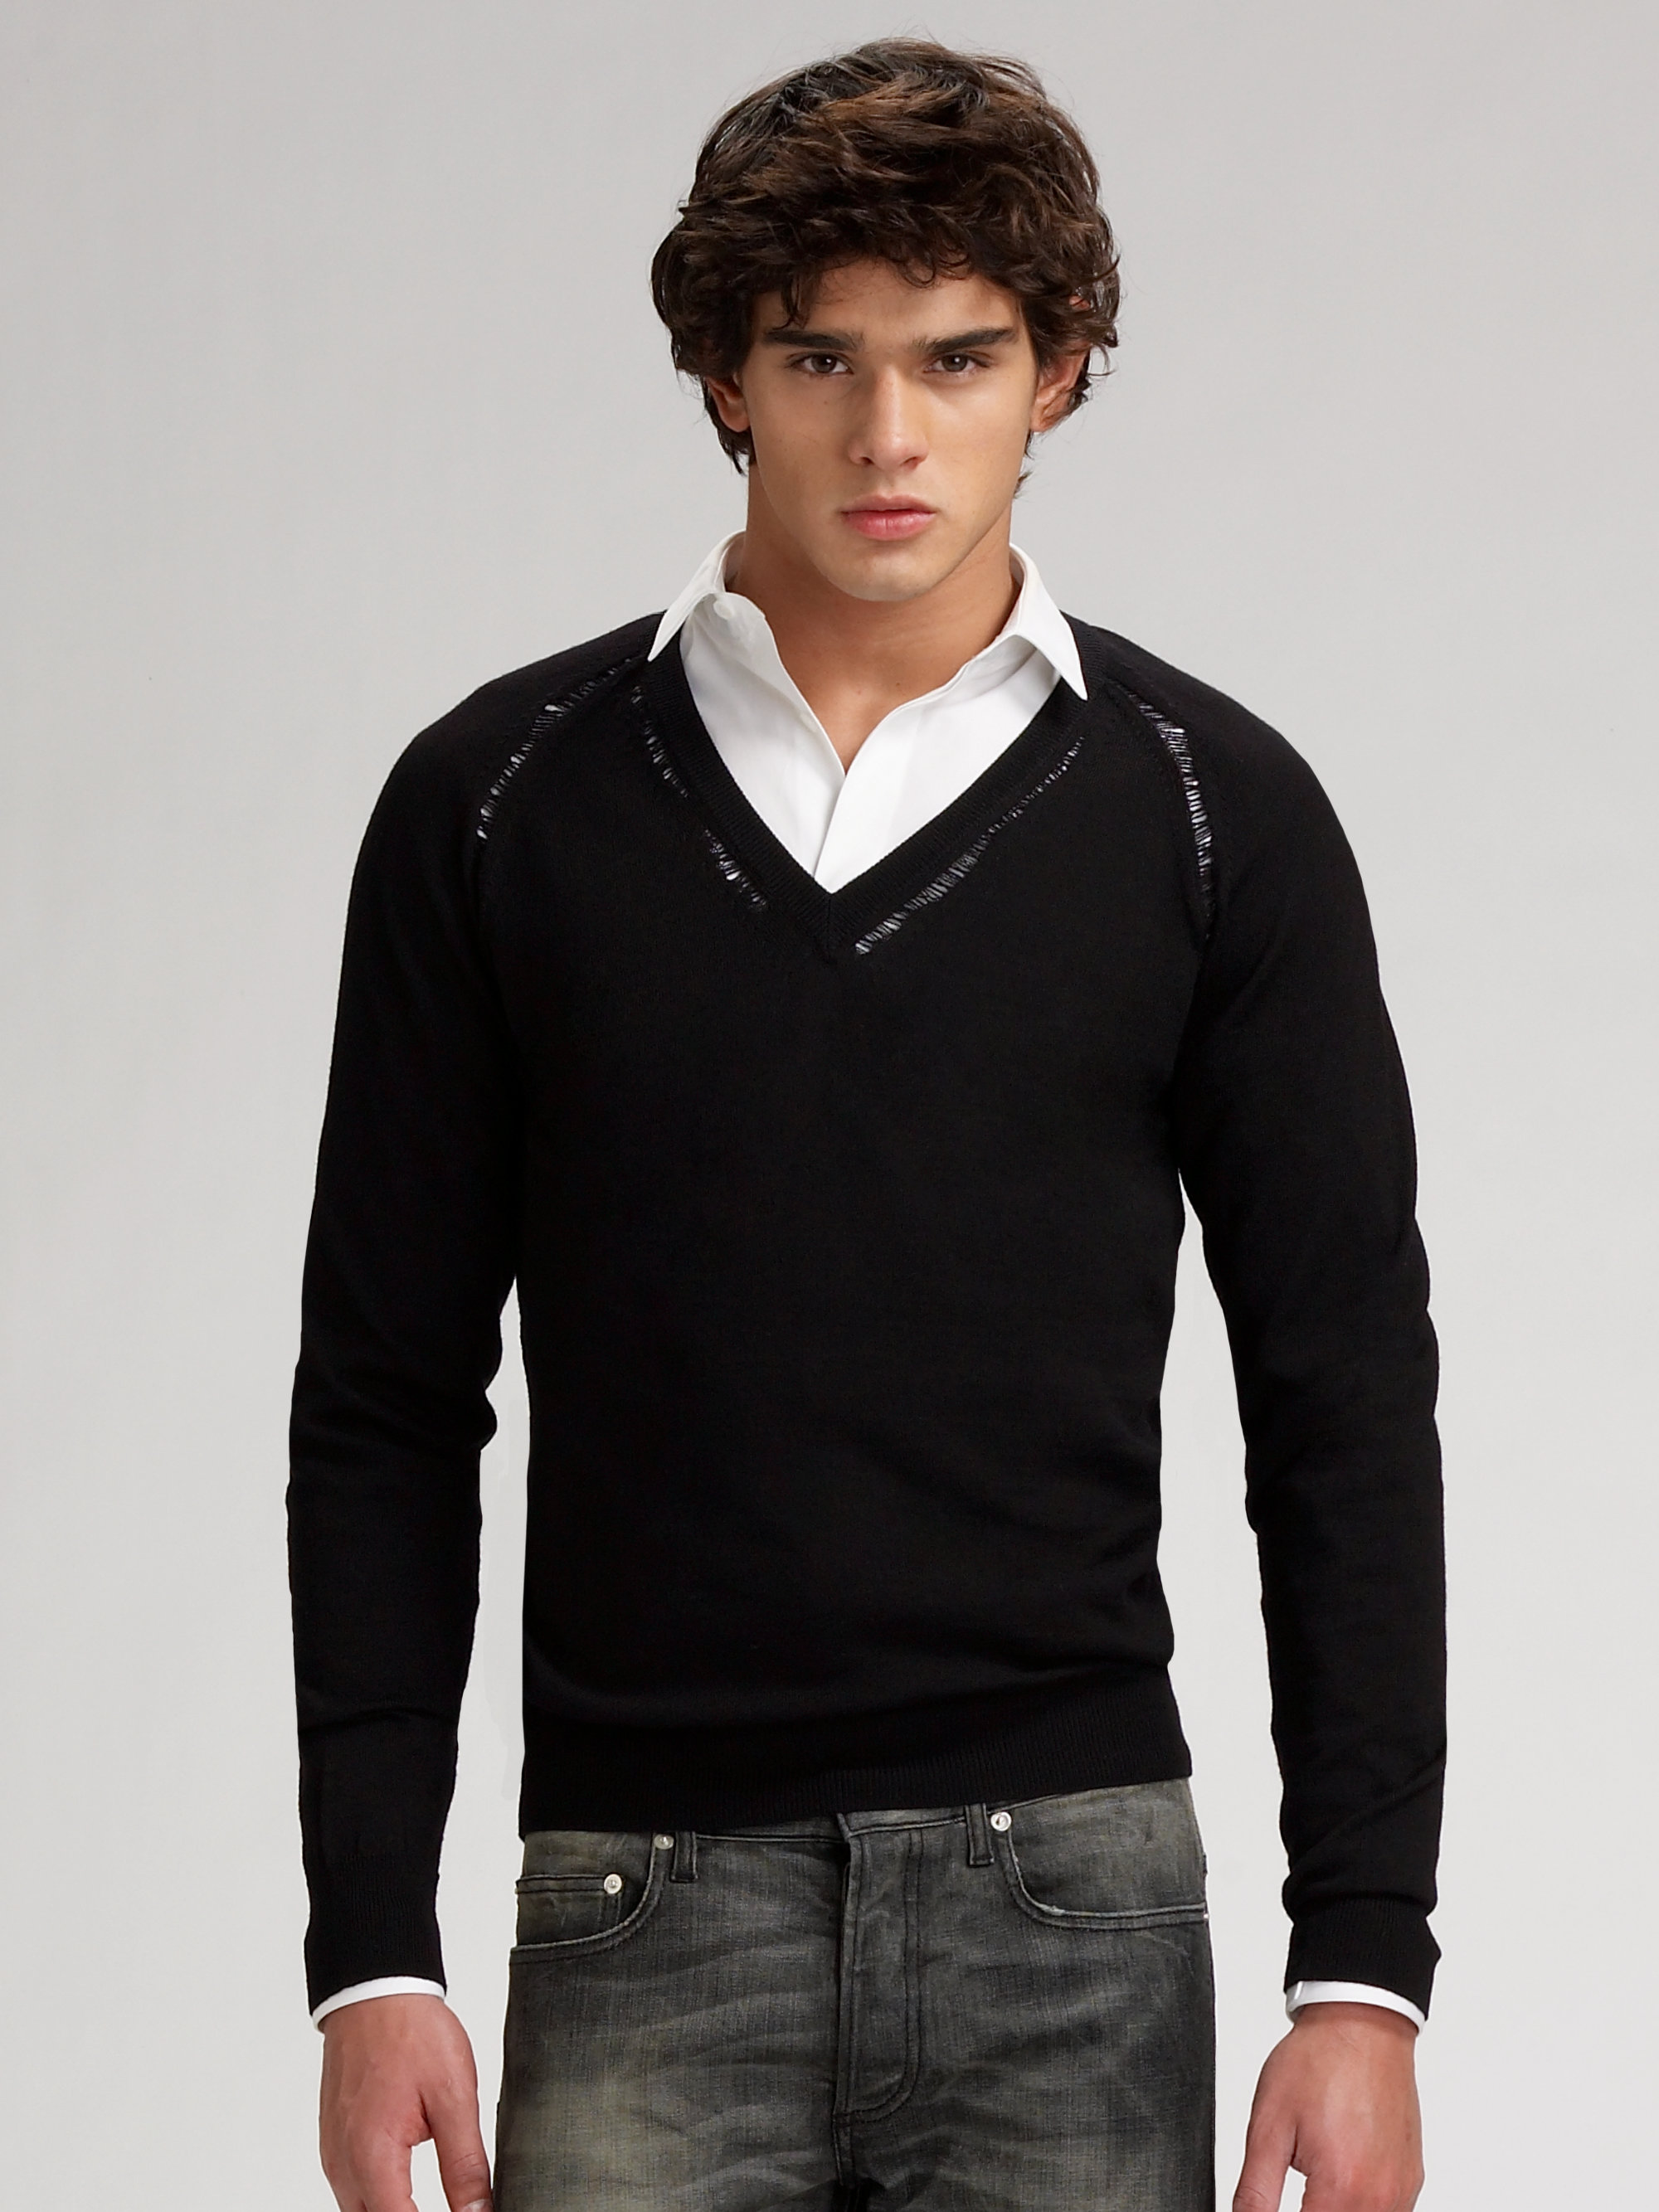 Lyst - Dior Homme Wool Sweater in Black for Men